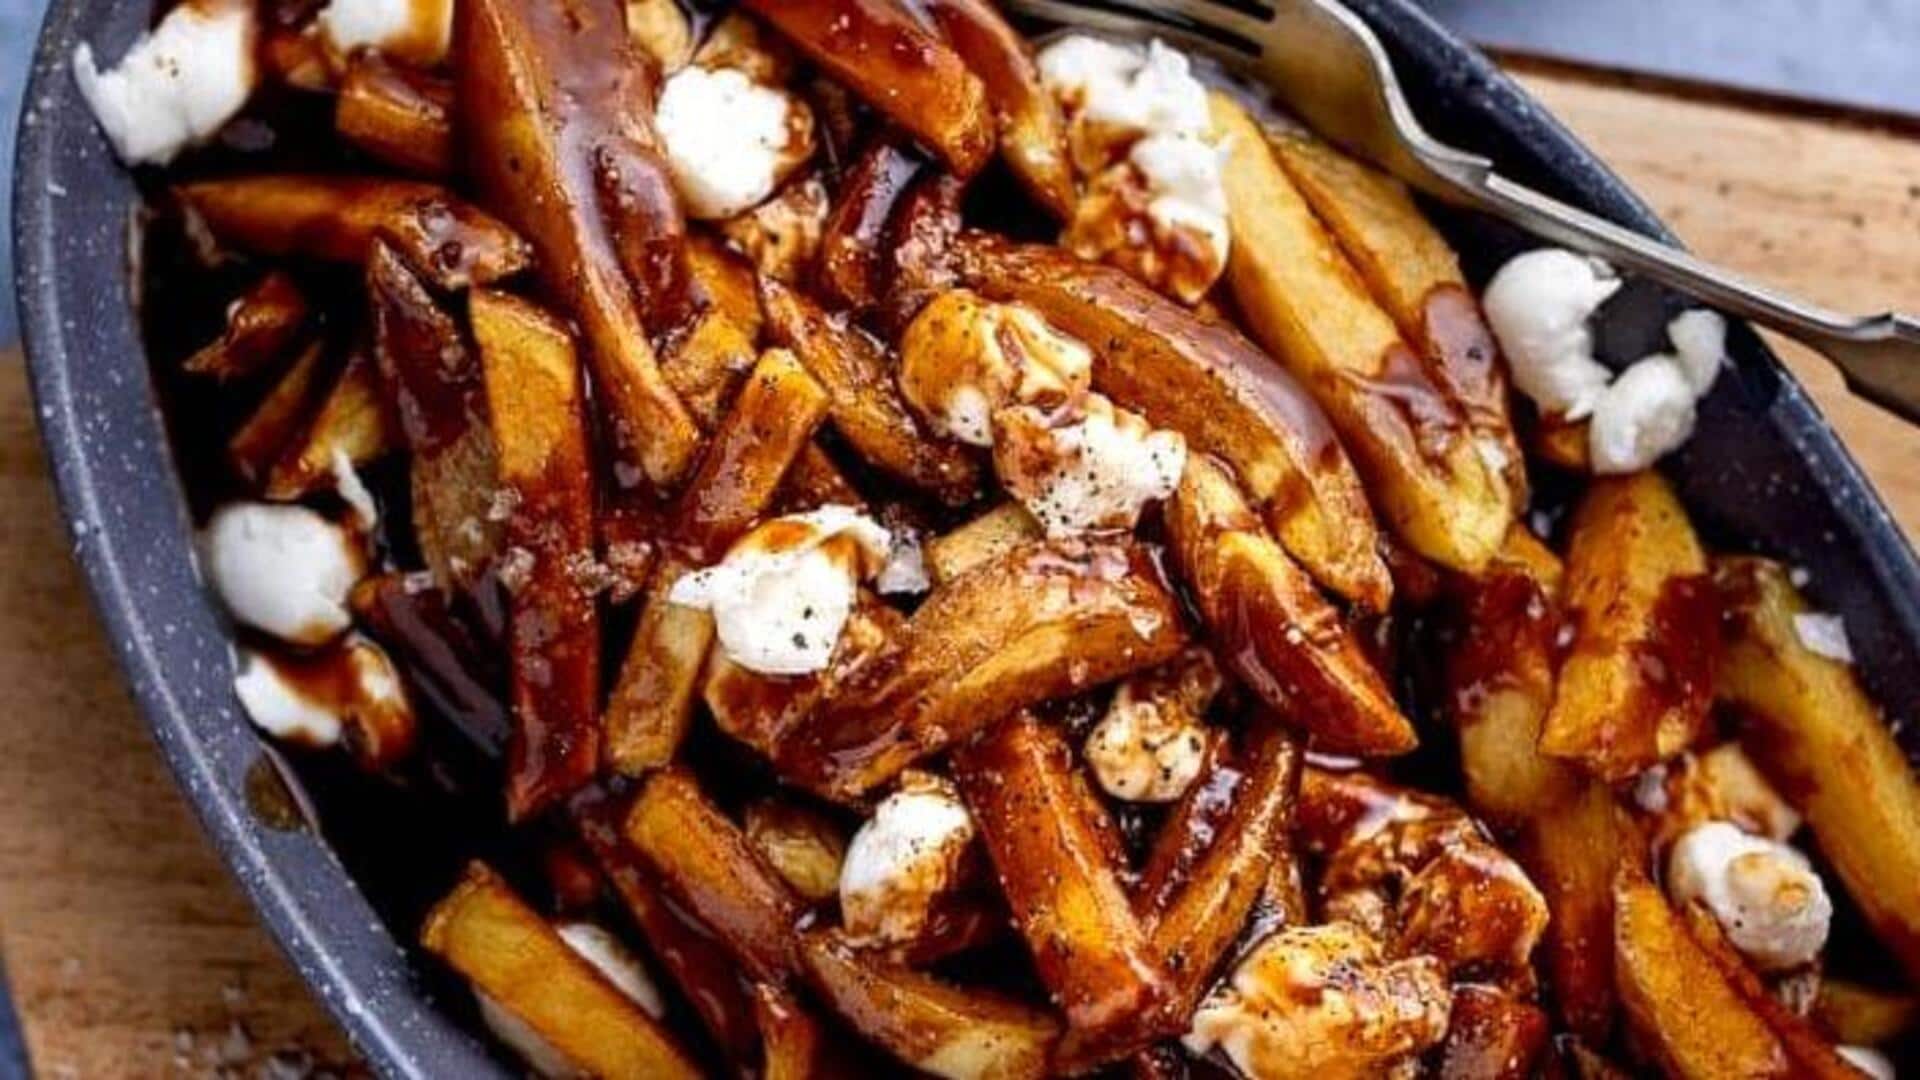 Montreal's poutine trail delights that you should bookmark